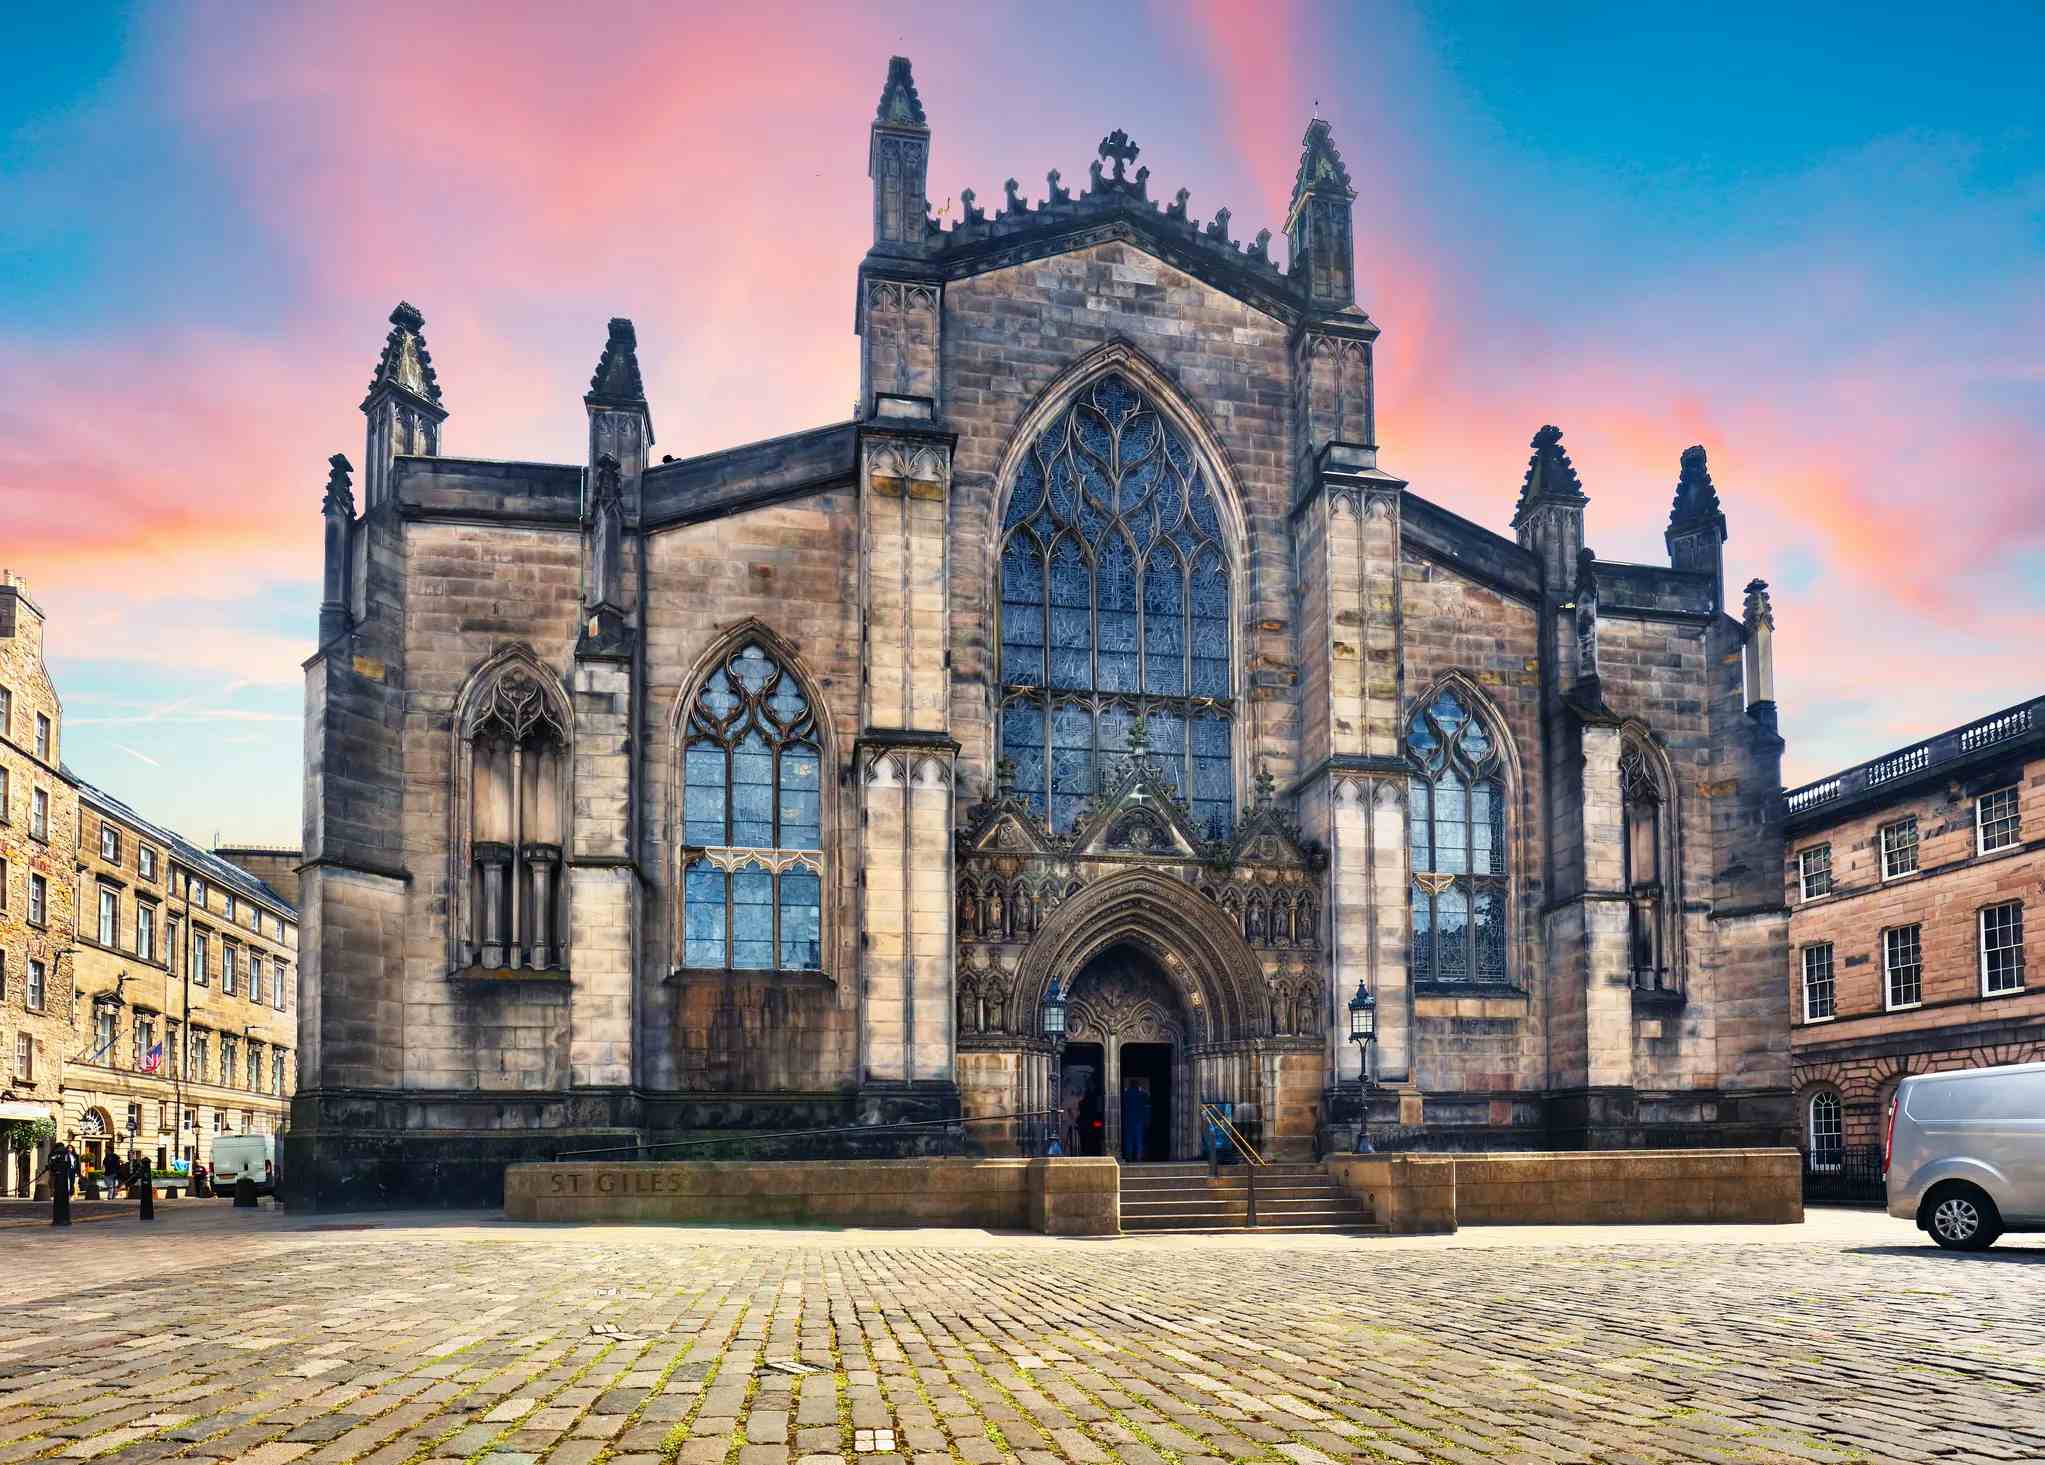 St. Giles Cathedral image